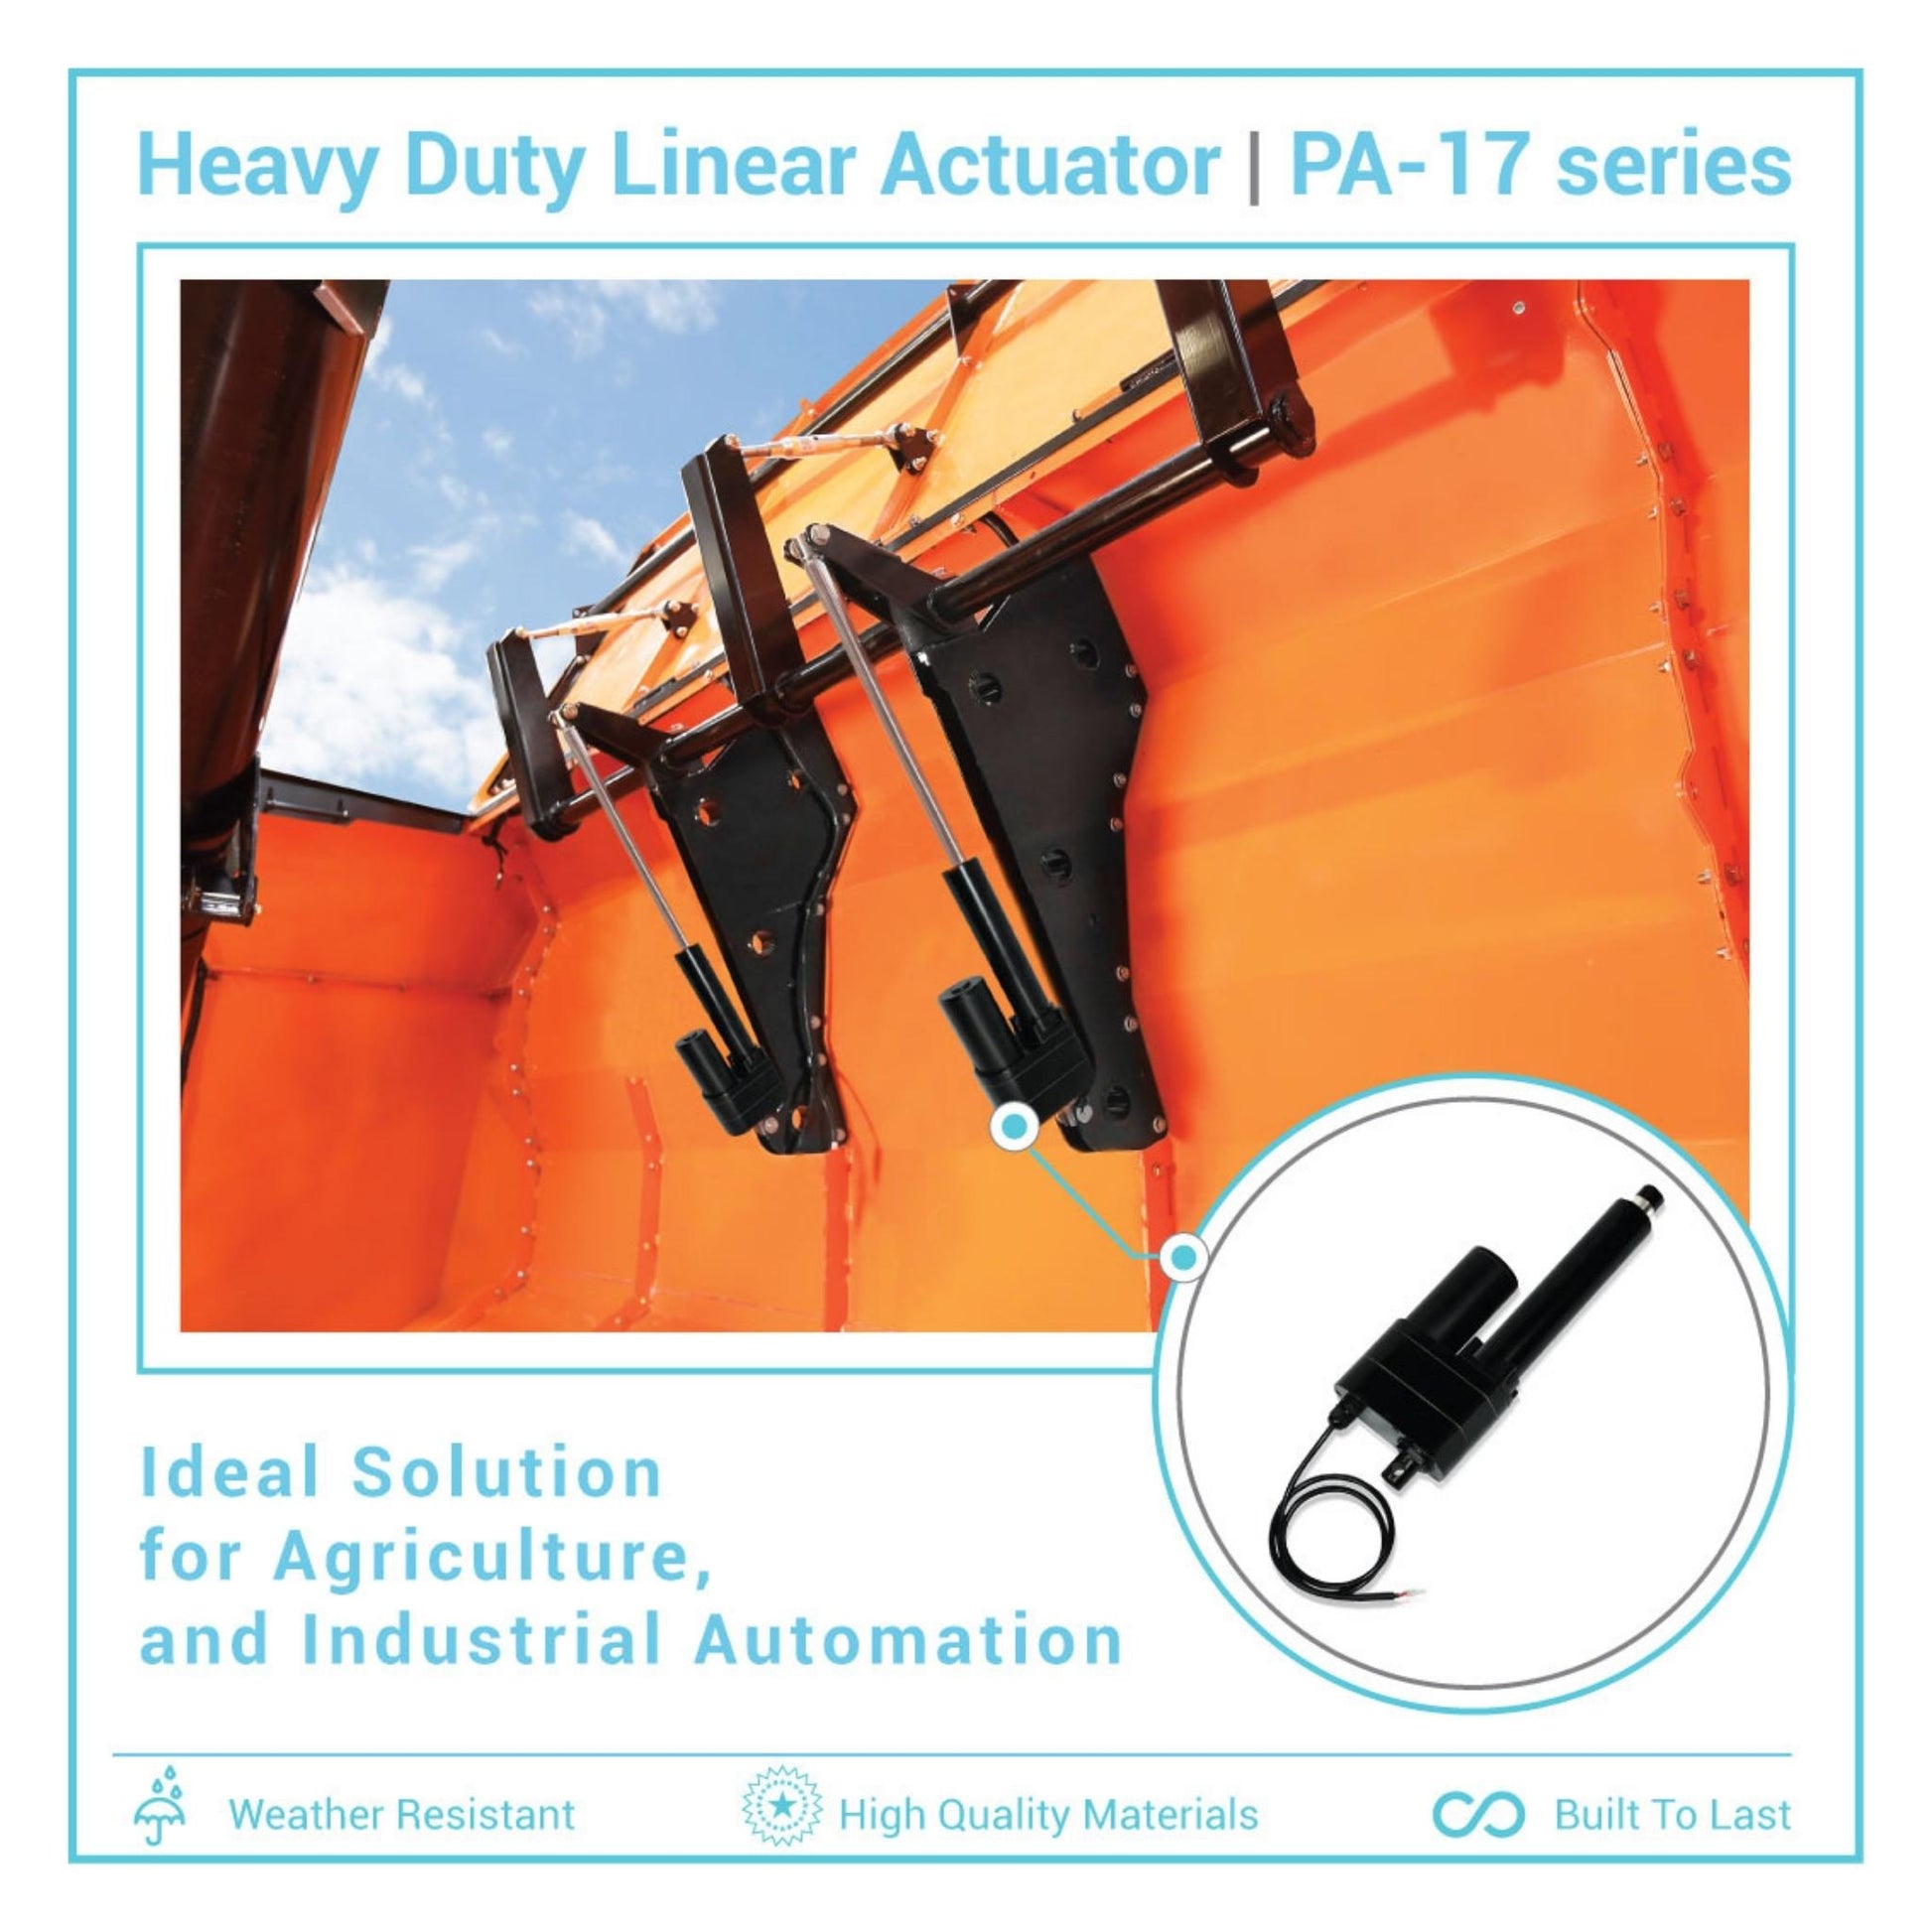 Heavy-Duty Sliding Solutions handle loads 170 lbs. or greater